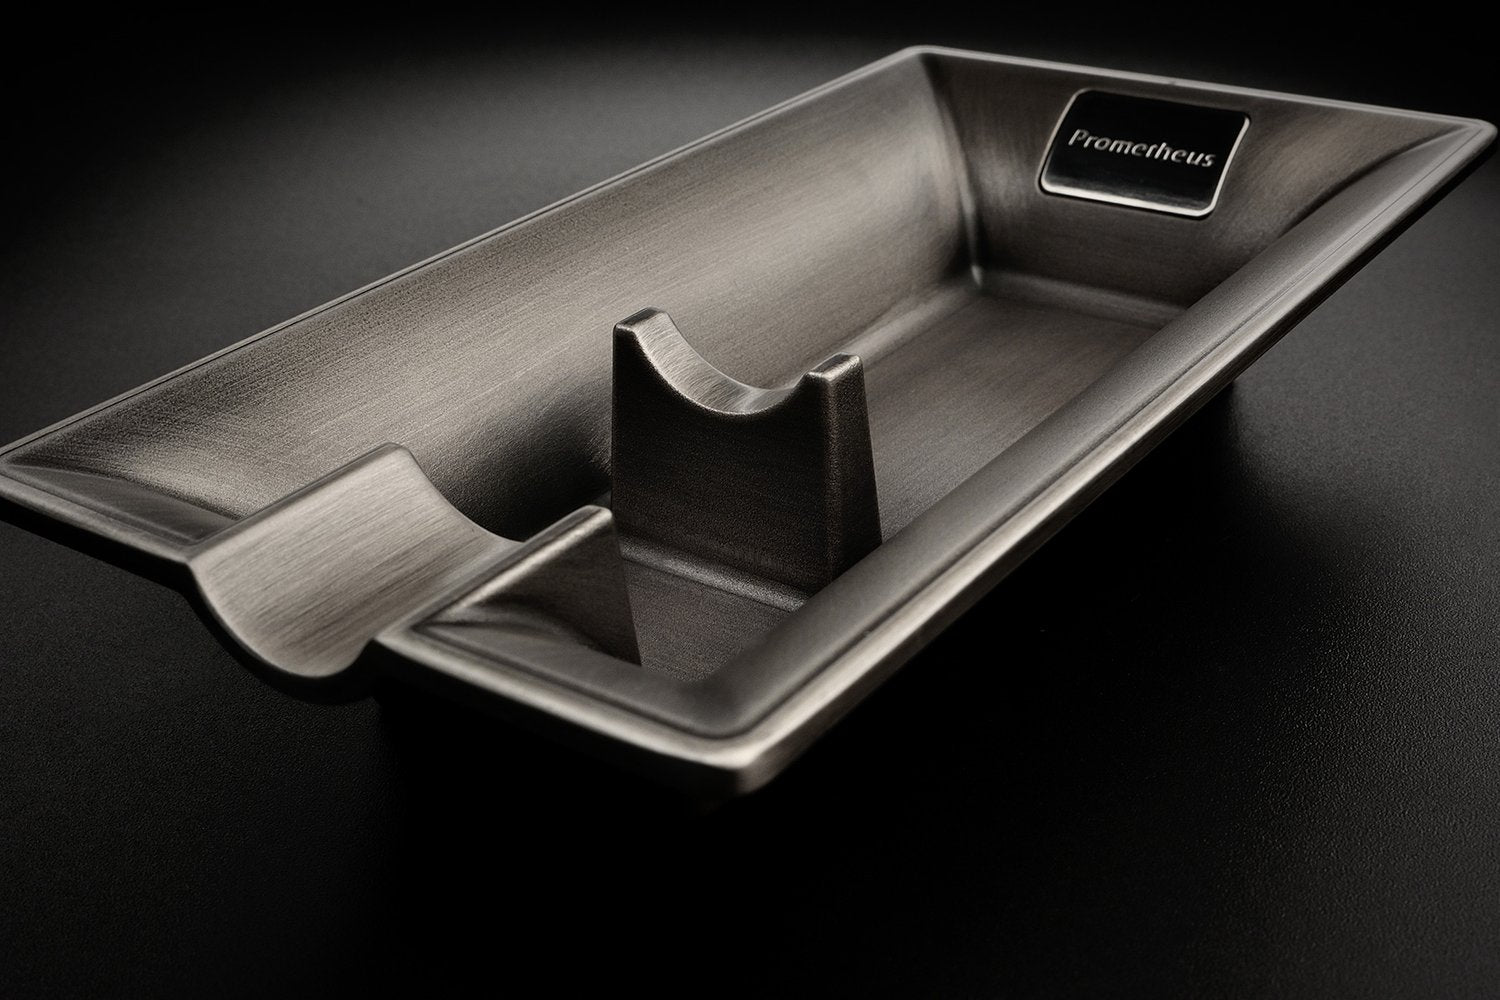 A modern brushed chrome metal ashtray.  The ashtray is sleek with a single cigar ledge. The brand is Prometheus.